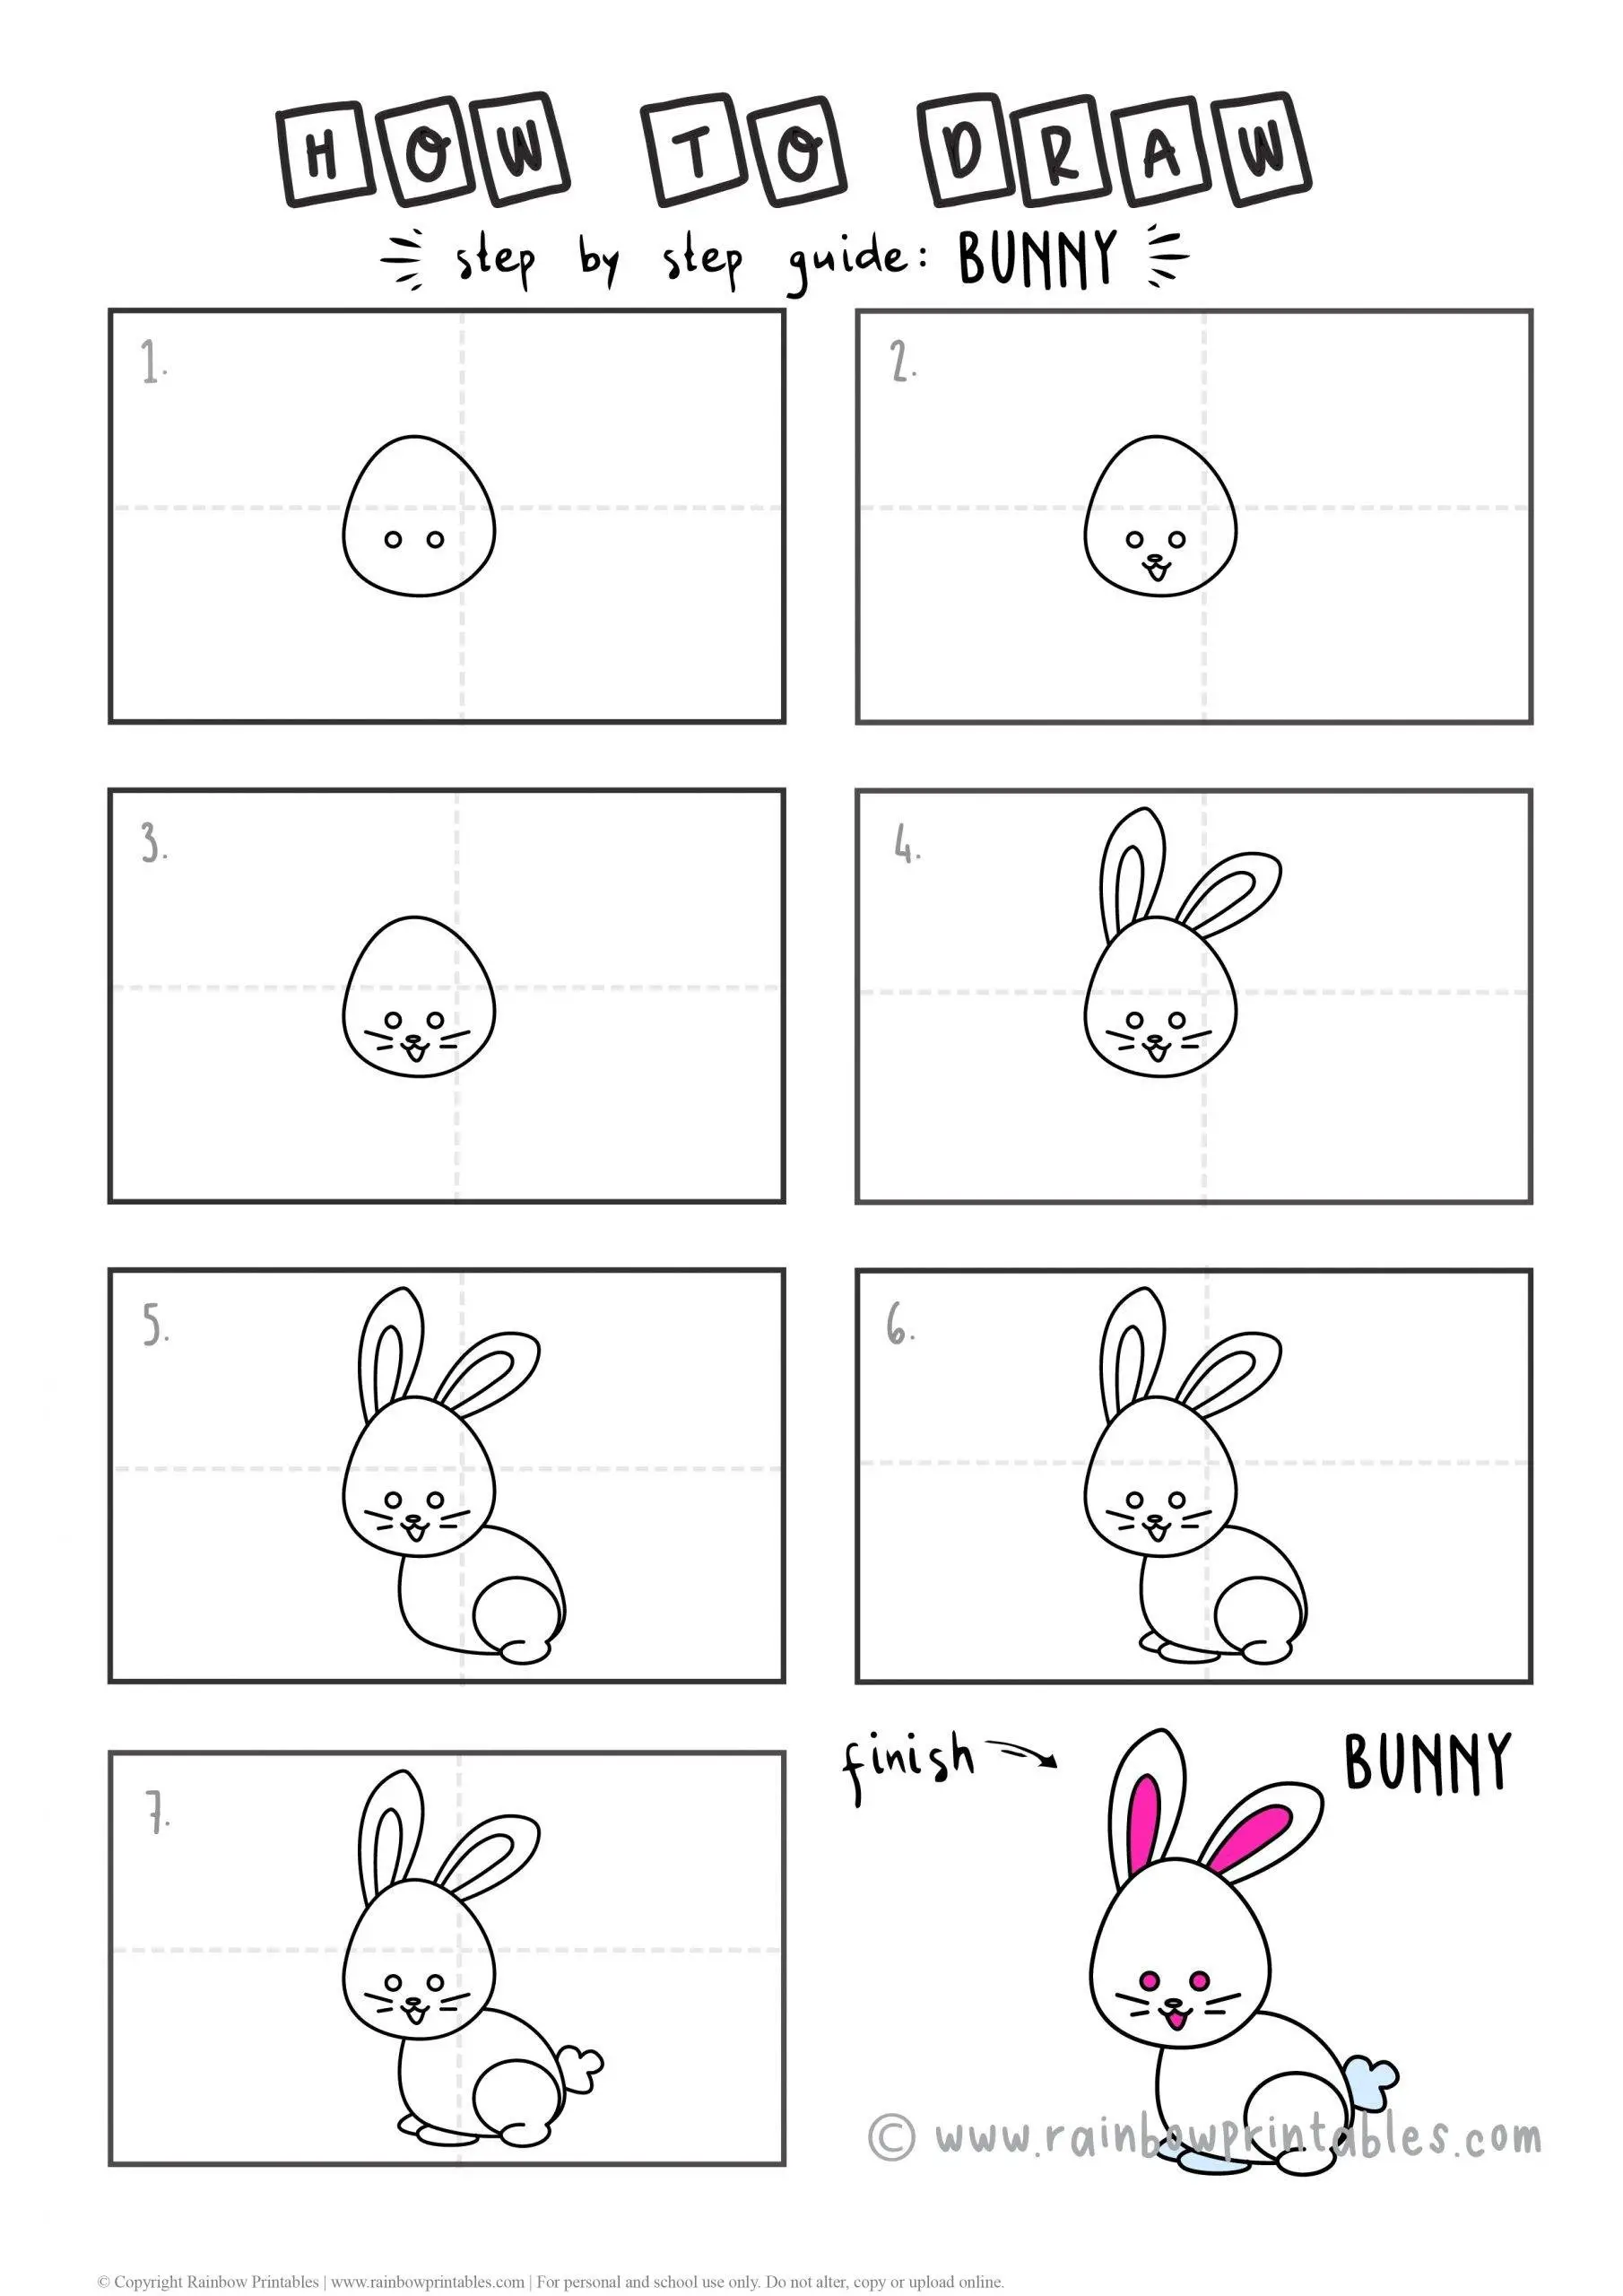 How To Draw a BUNNY RABBIT Step by Step for Beginners and Kids | Easy and Simple